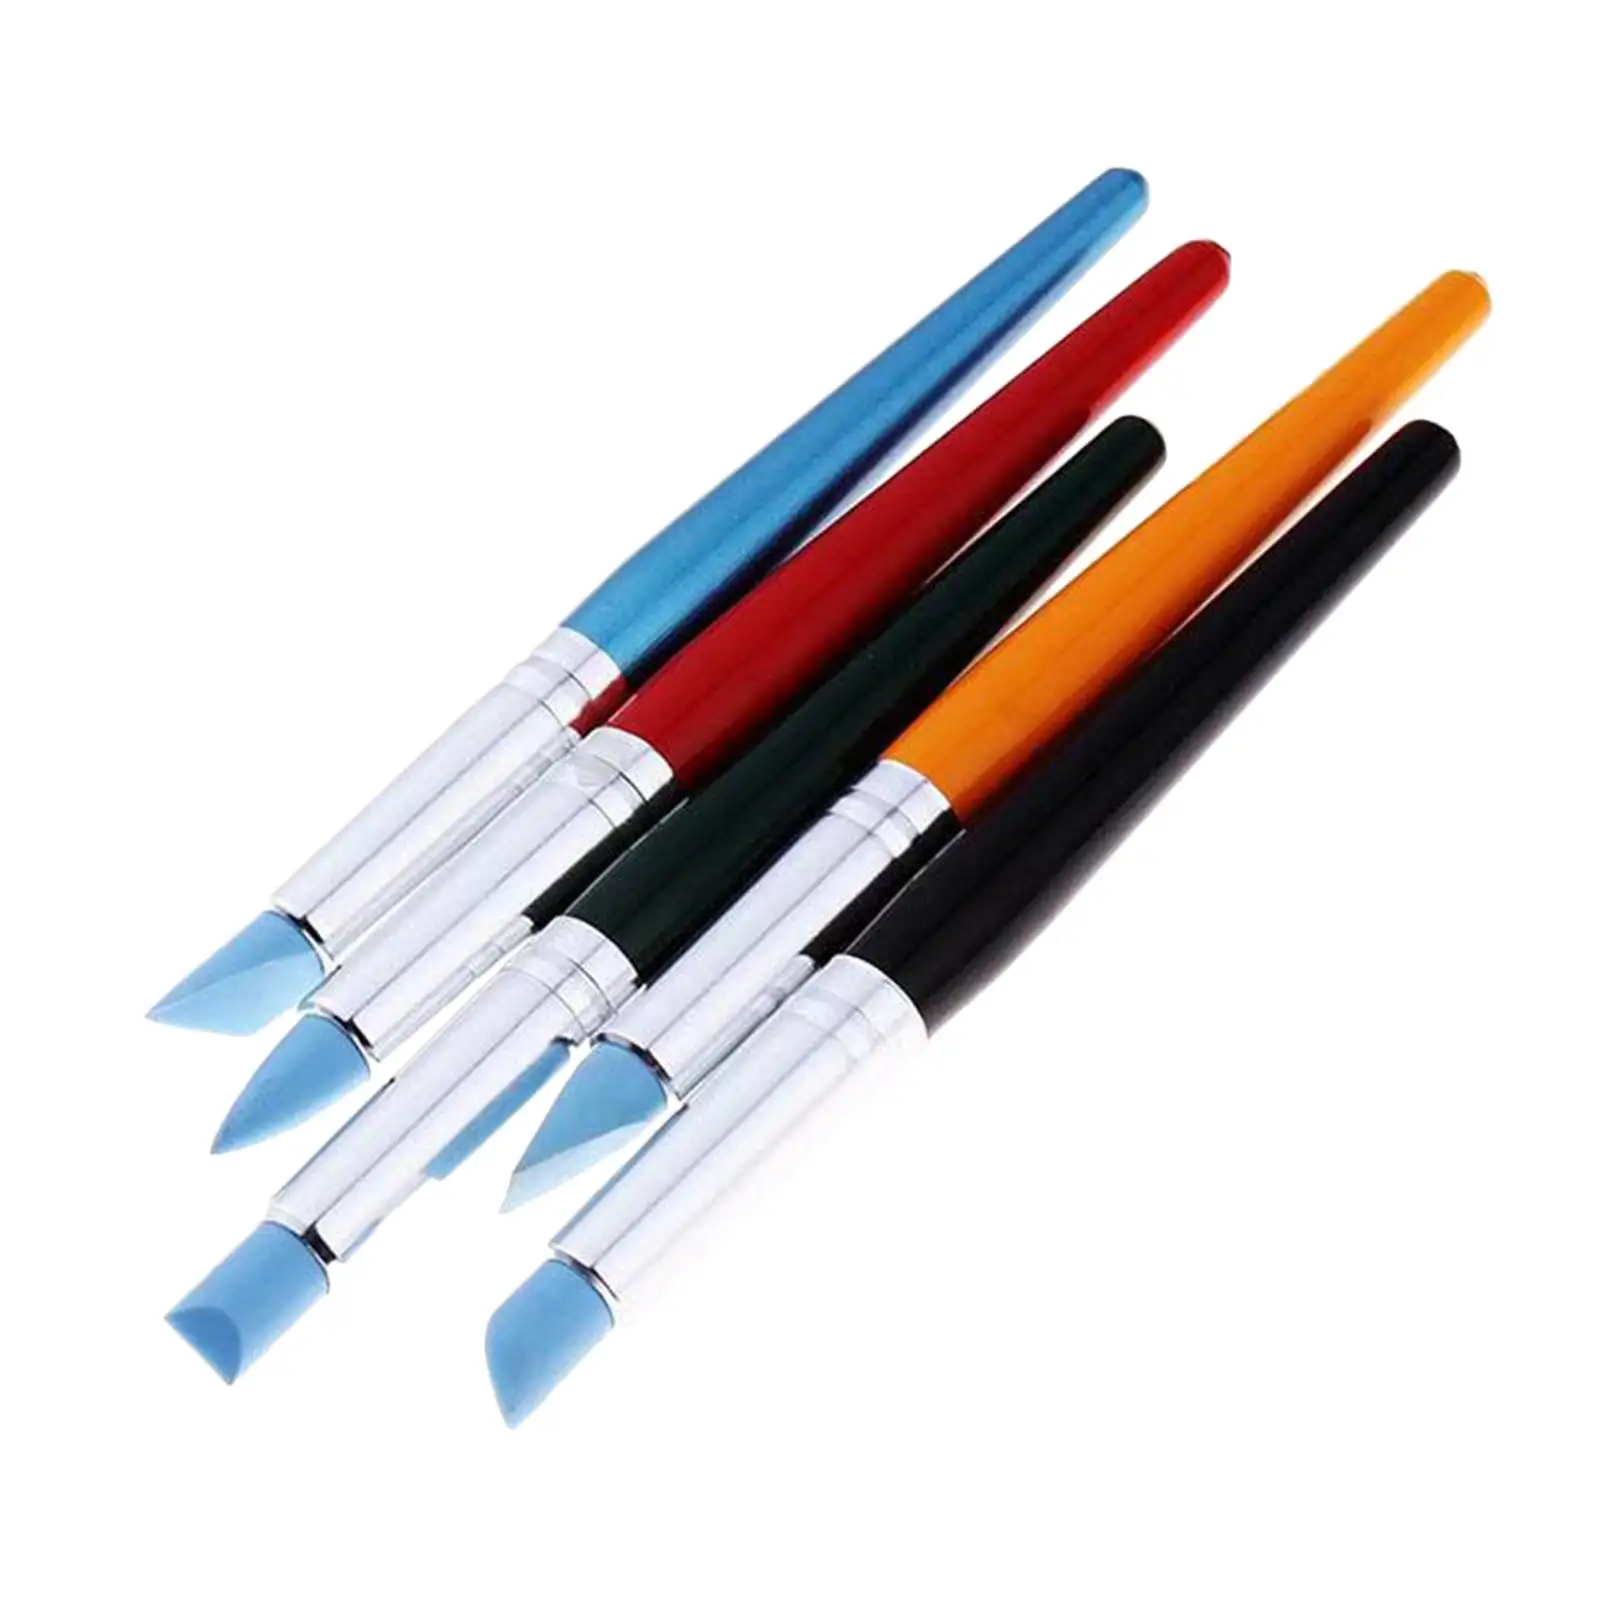 Black Rubber Brush Set Soft Clay Tools Black Rubber Pen Soft Tip Silicone  Pen Set for clay craft